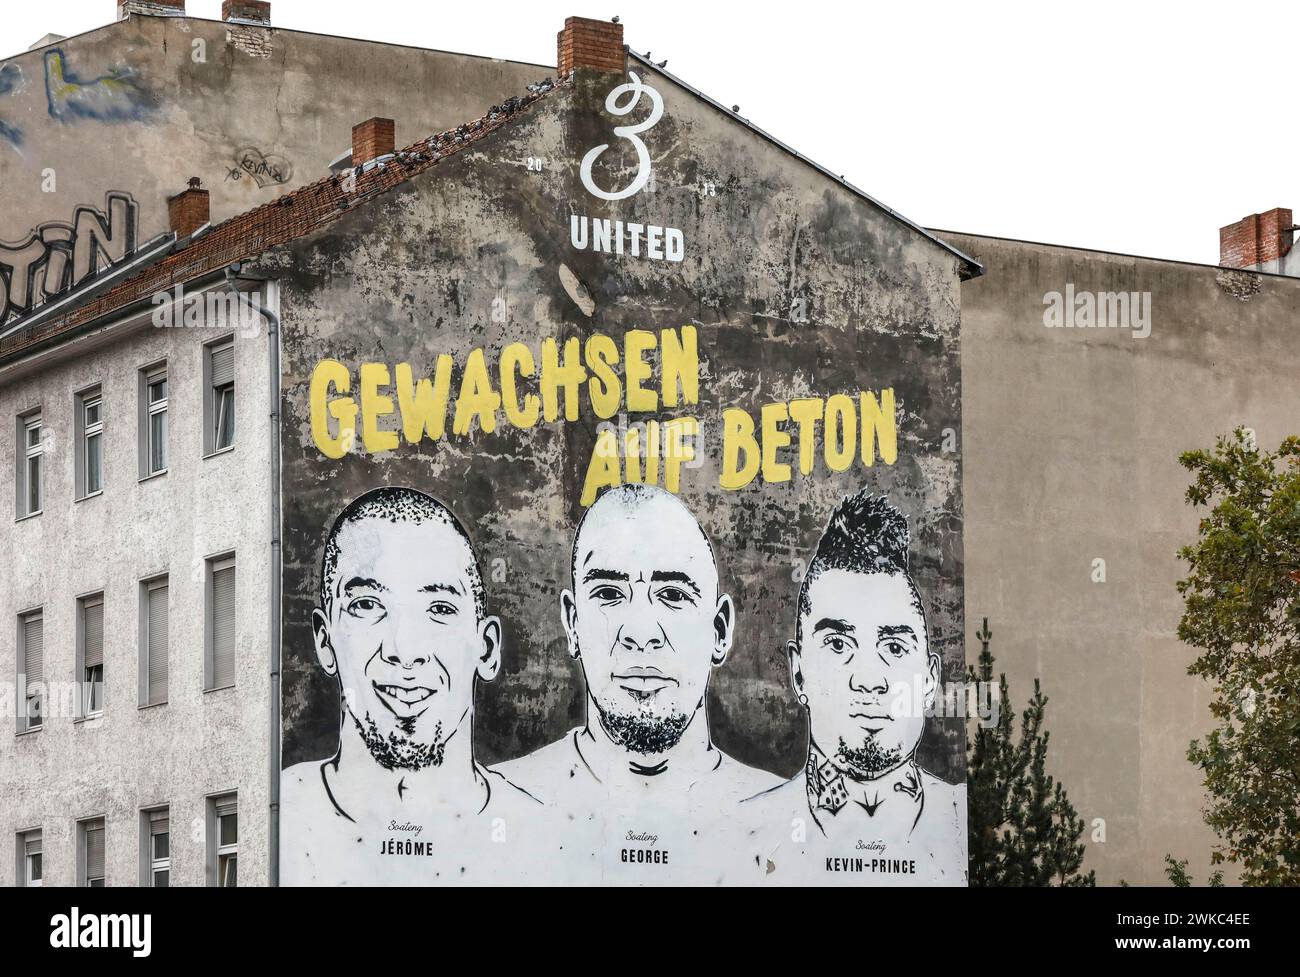 A picture of the brothers Jerome Boateng, George Boateng and Kevin-Prince Boateng can be seen on a wall in the Wedding district of Berlin. The Stock Photo